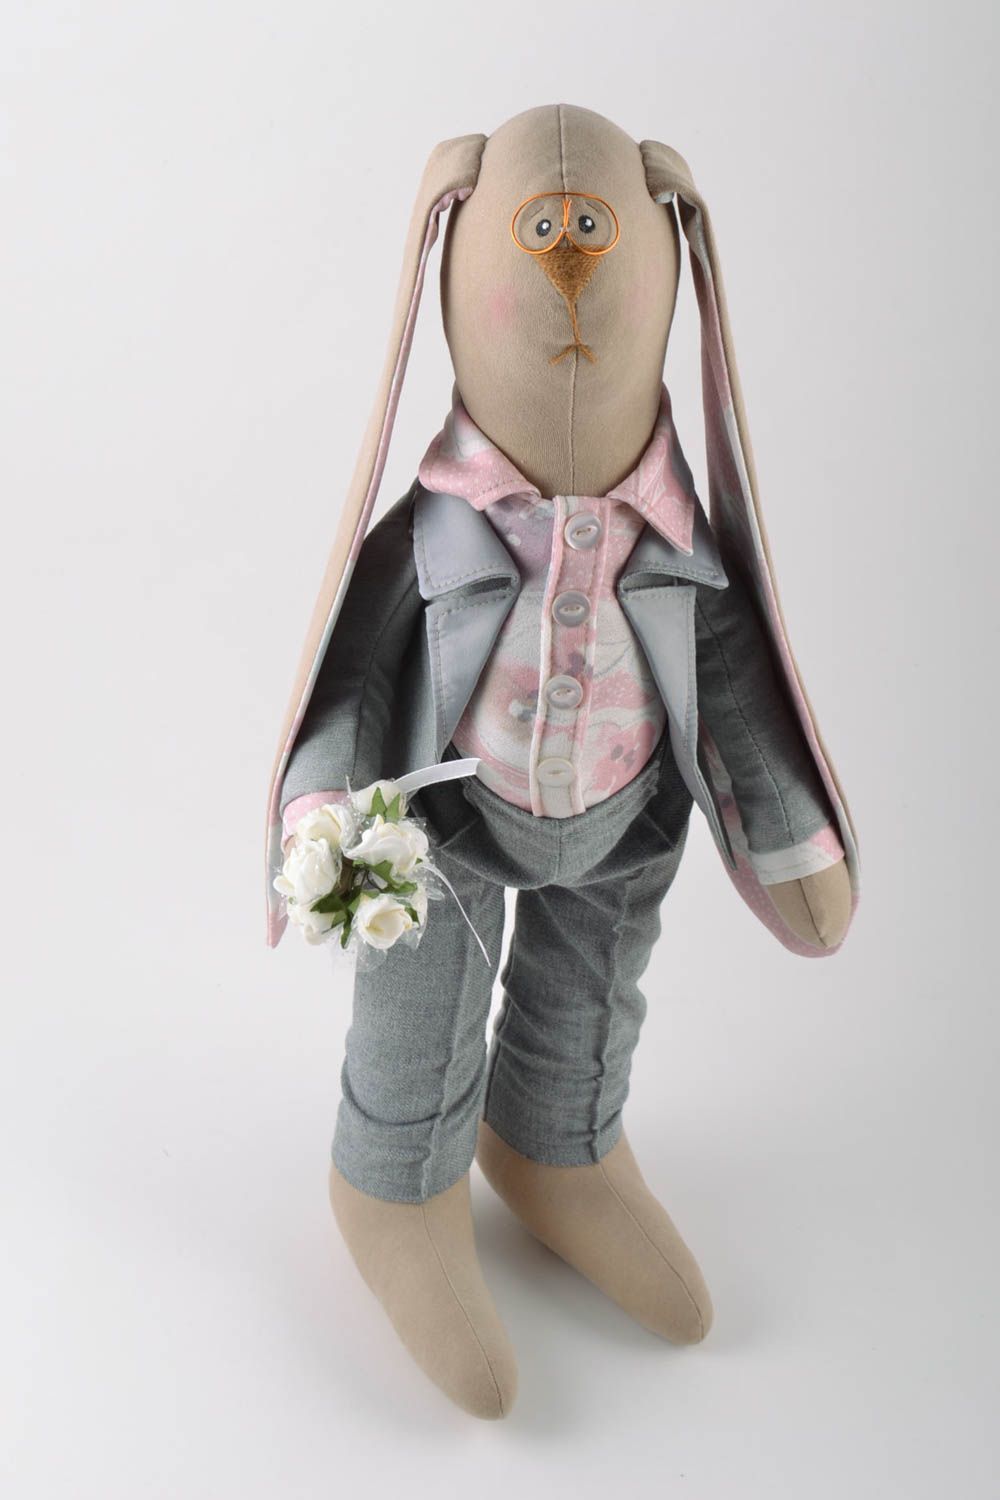 Handmade designer fabric soft toy rabbit groom in suit with flower bouquet photo 5